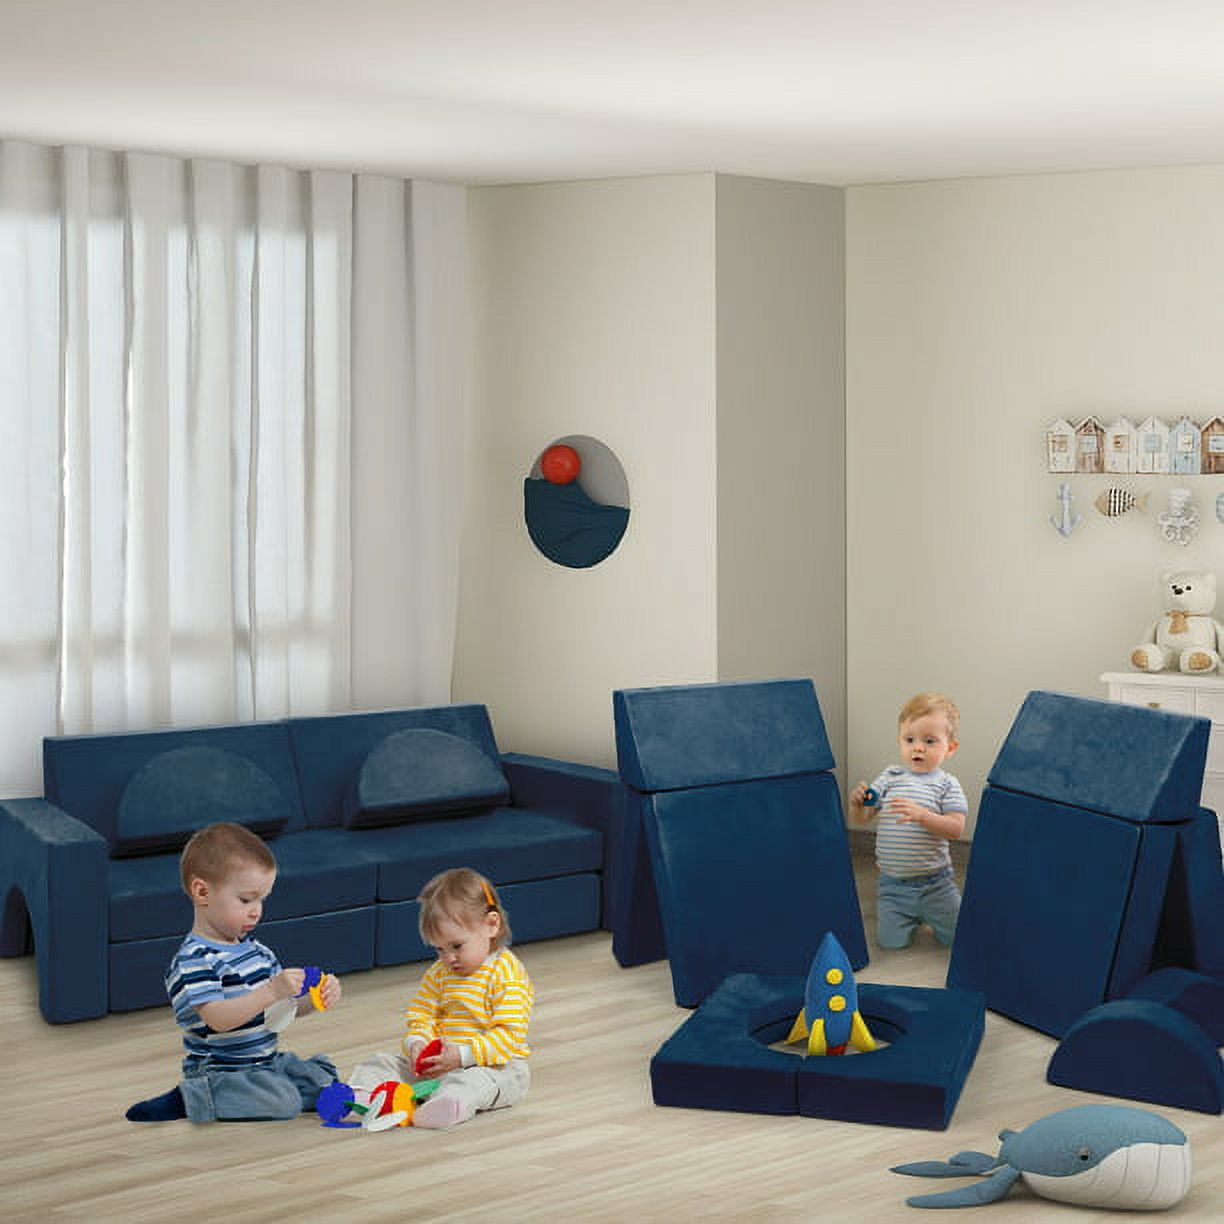 Tolead 8 Pcs Modular Kids Blue Sectional Sofa, Convertible Furniture, Child Couch Play Imaginative